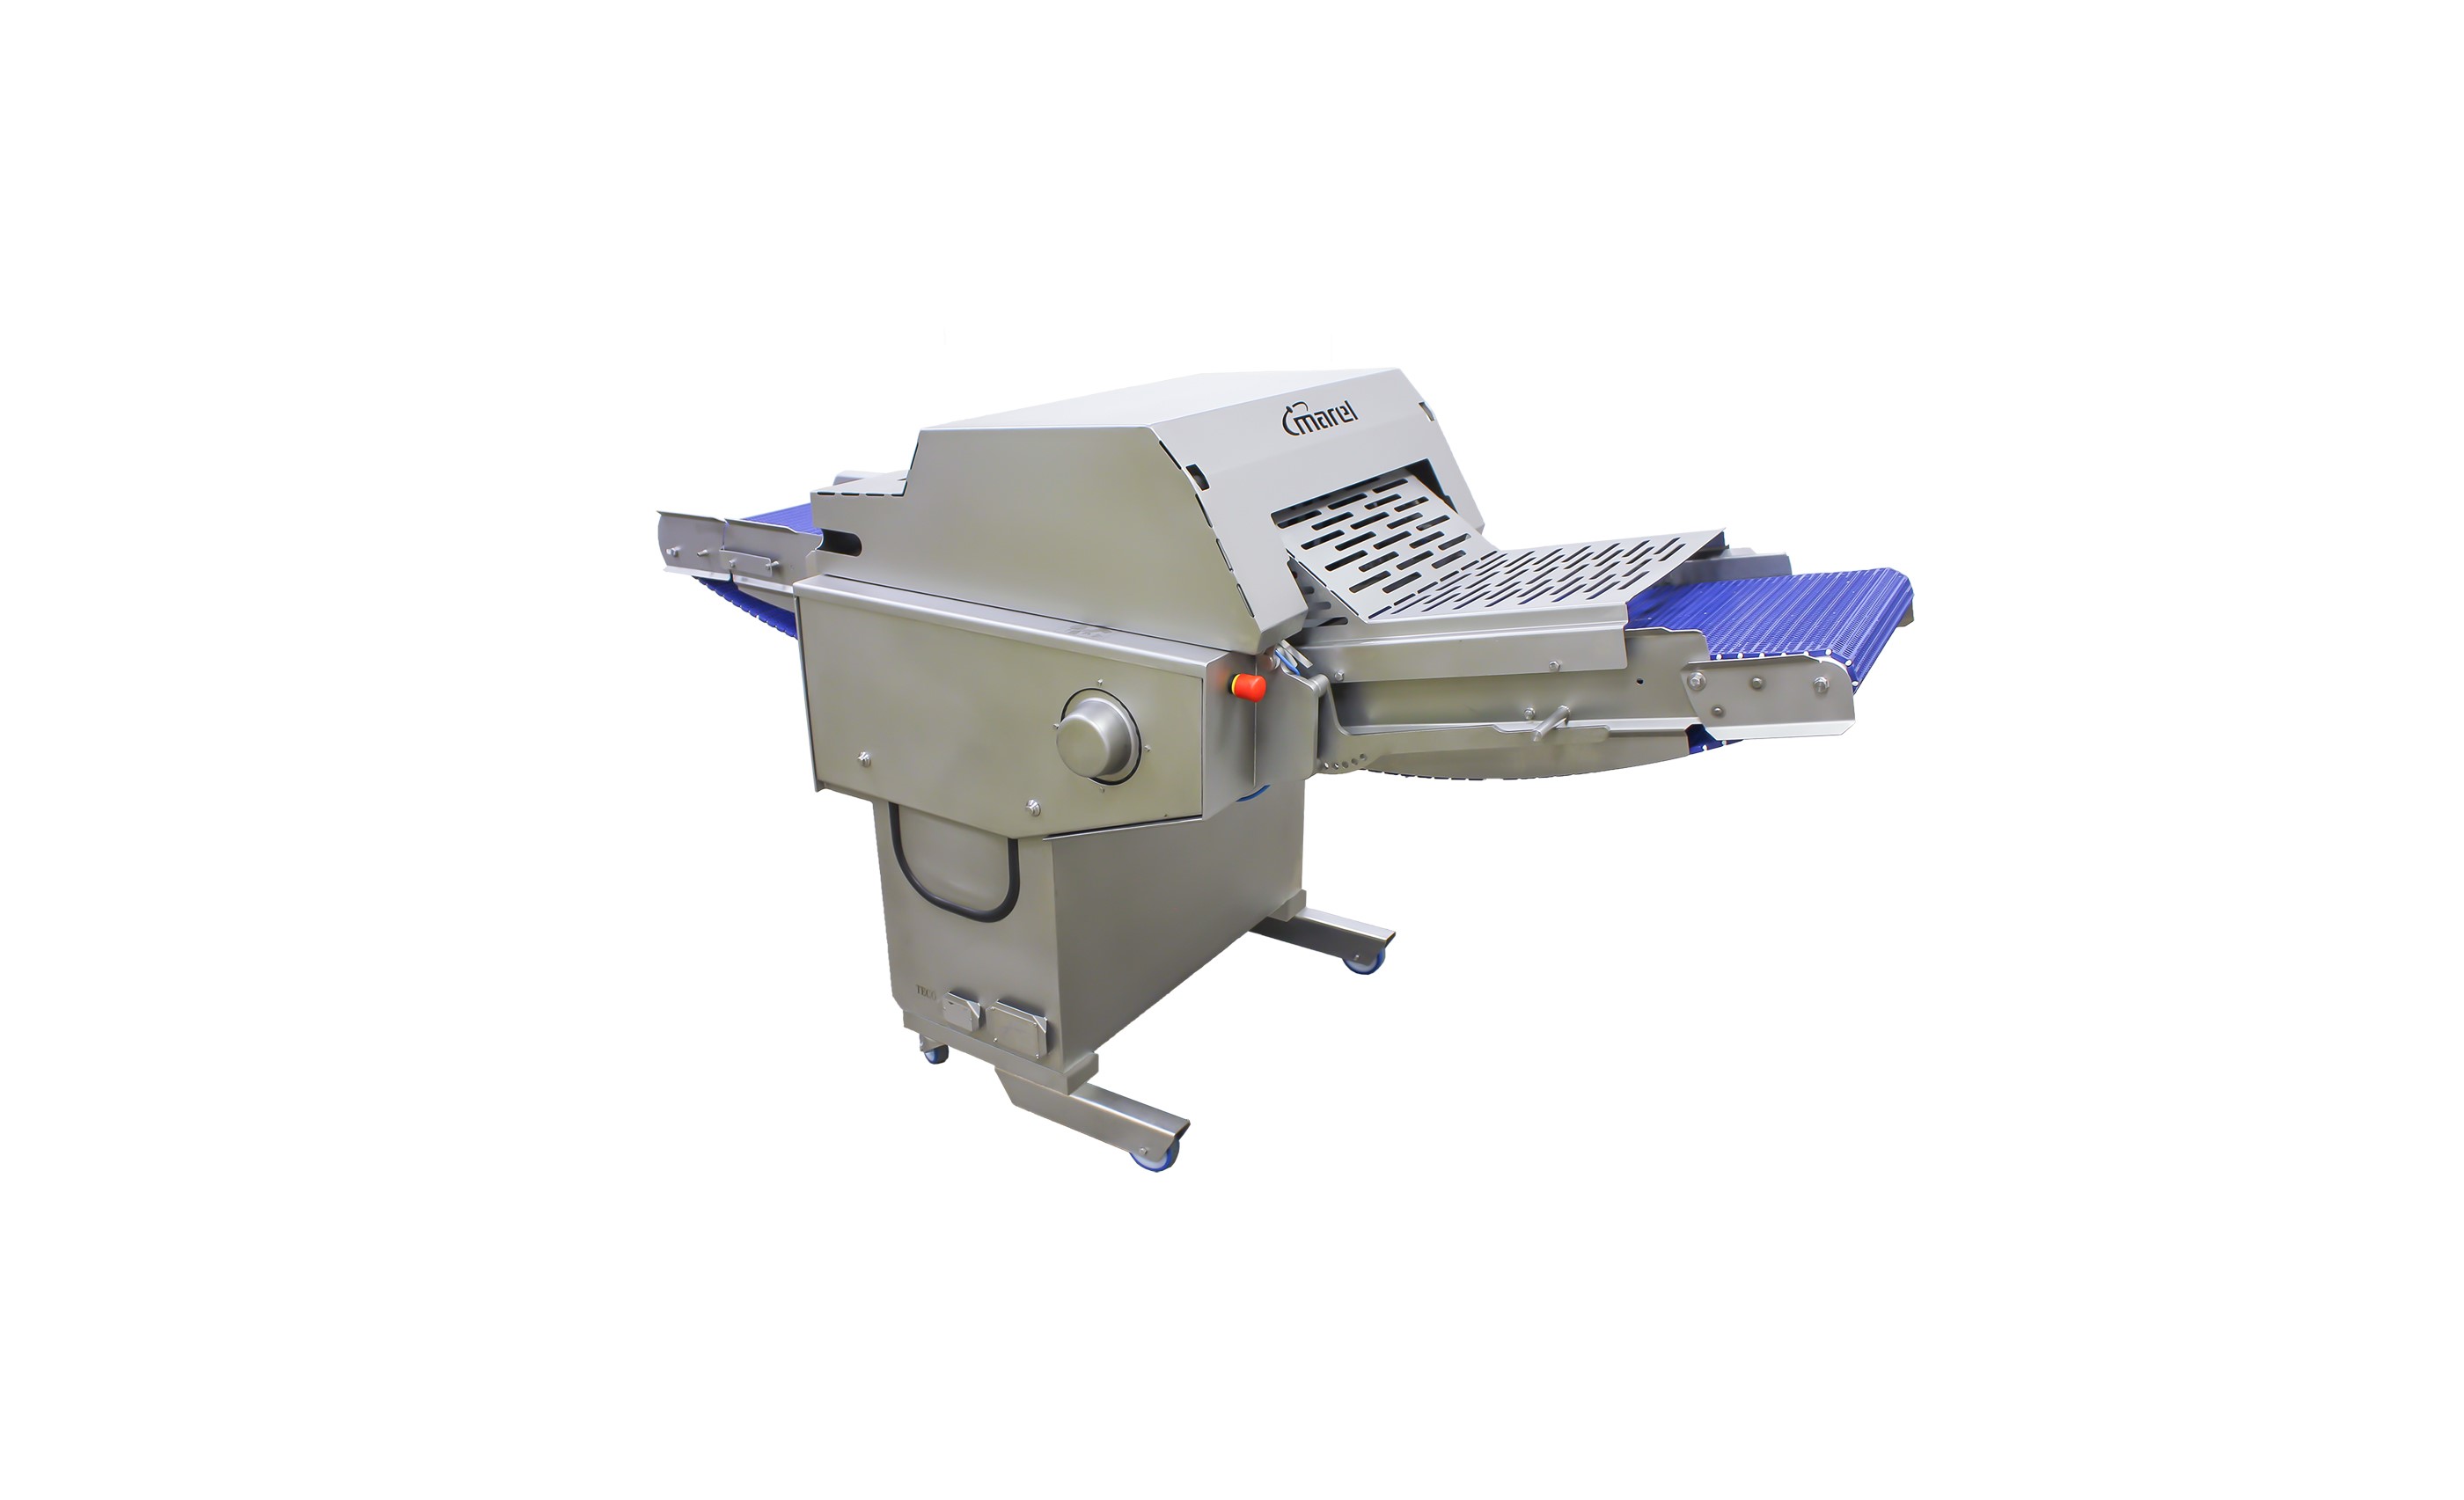 Townsend SK 14-410 Conveyorized Poultry skinner